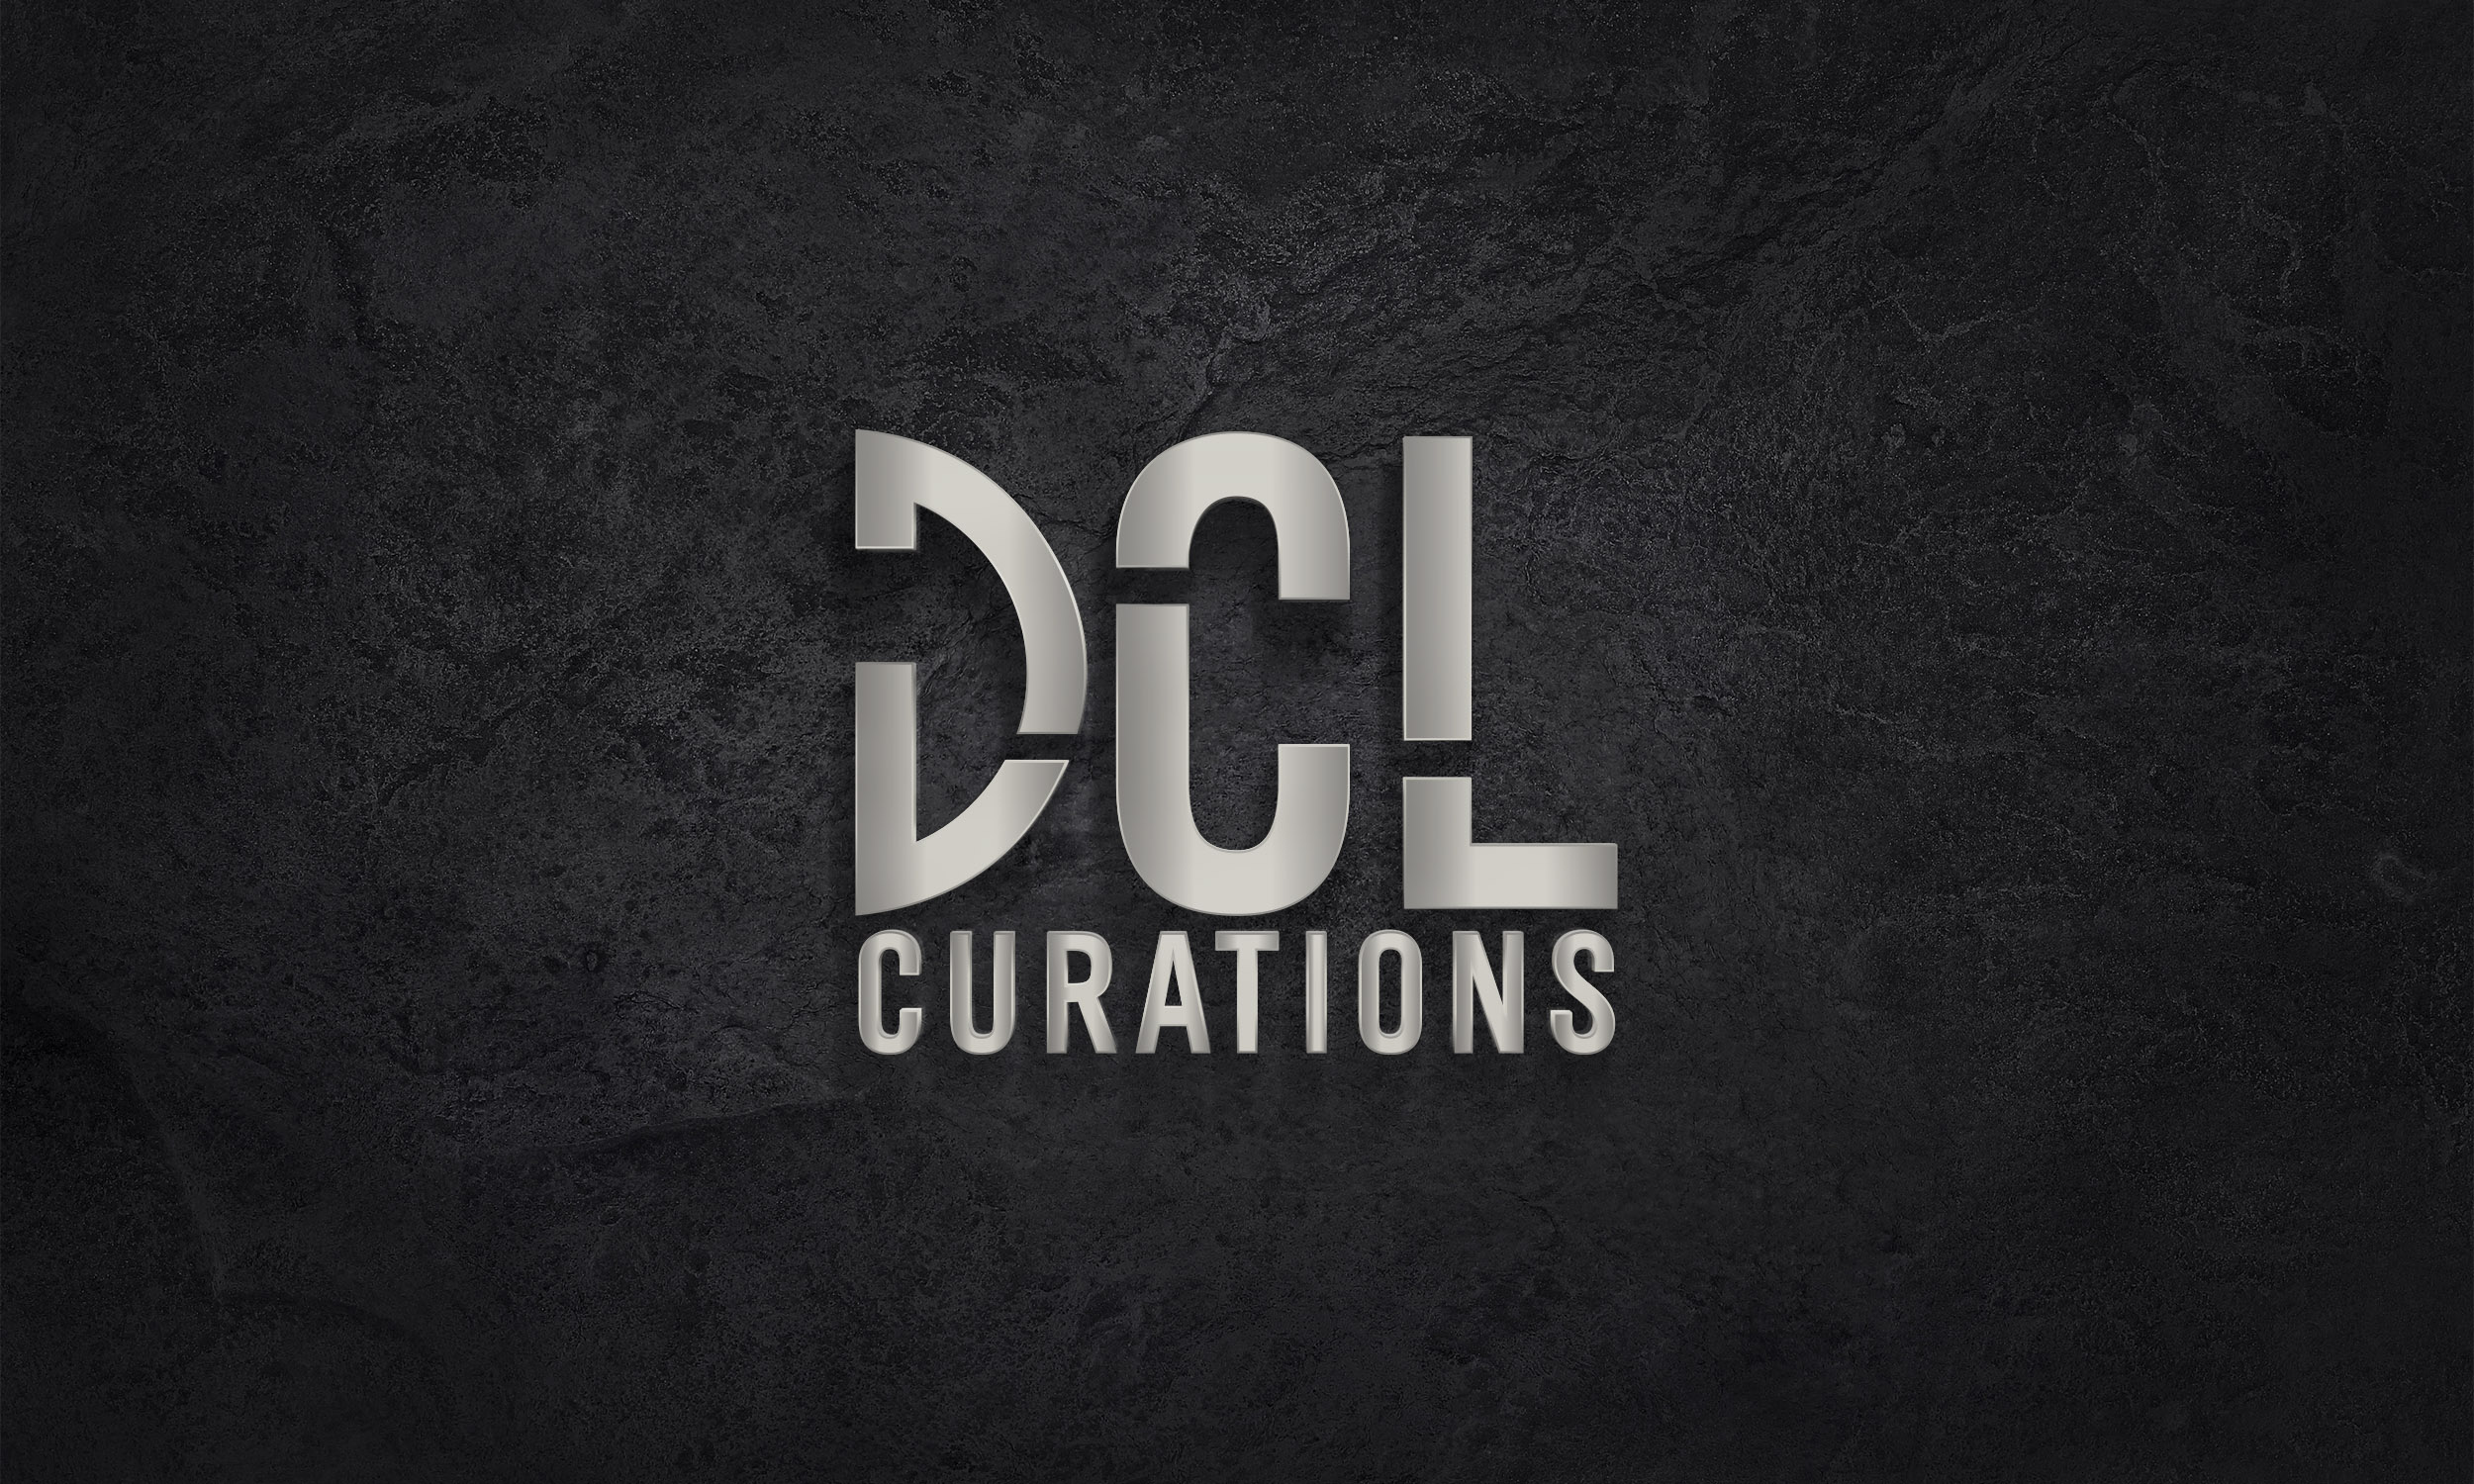 DCLCurations